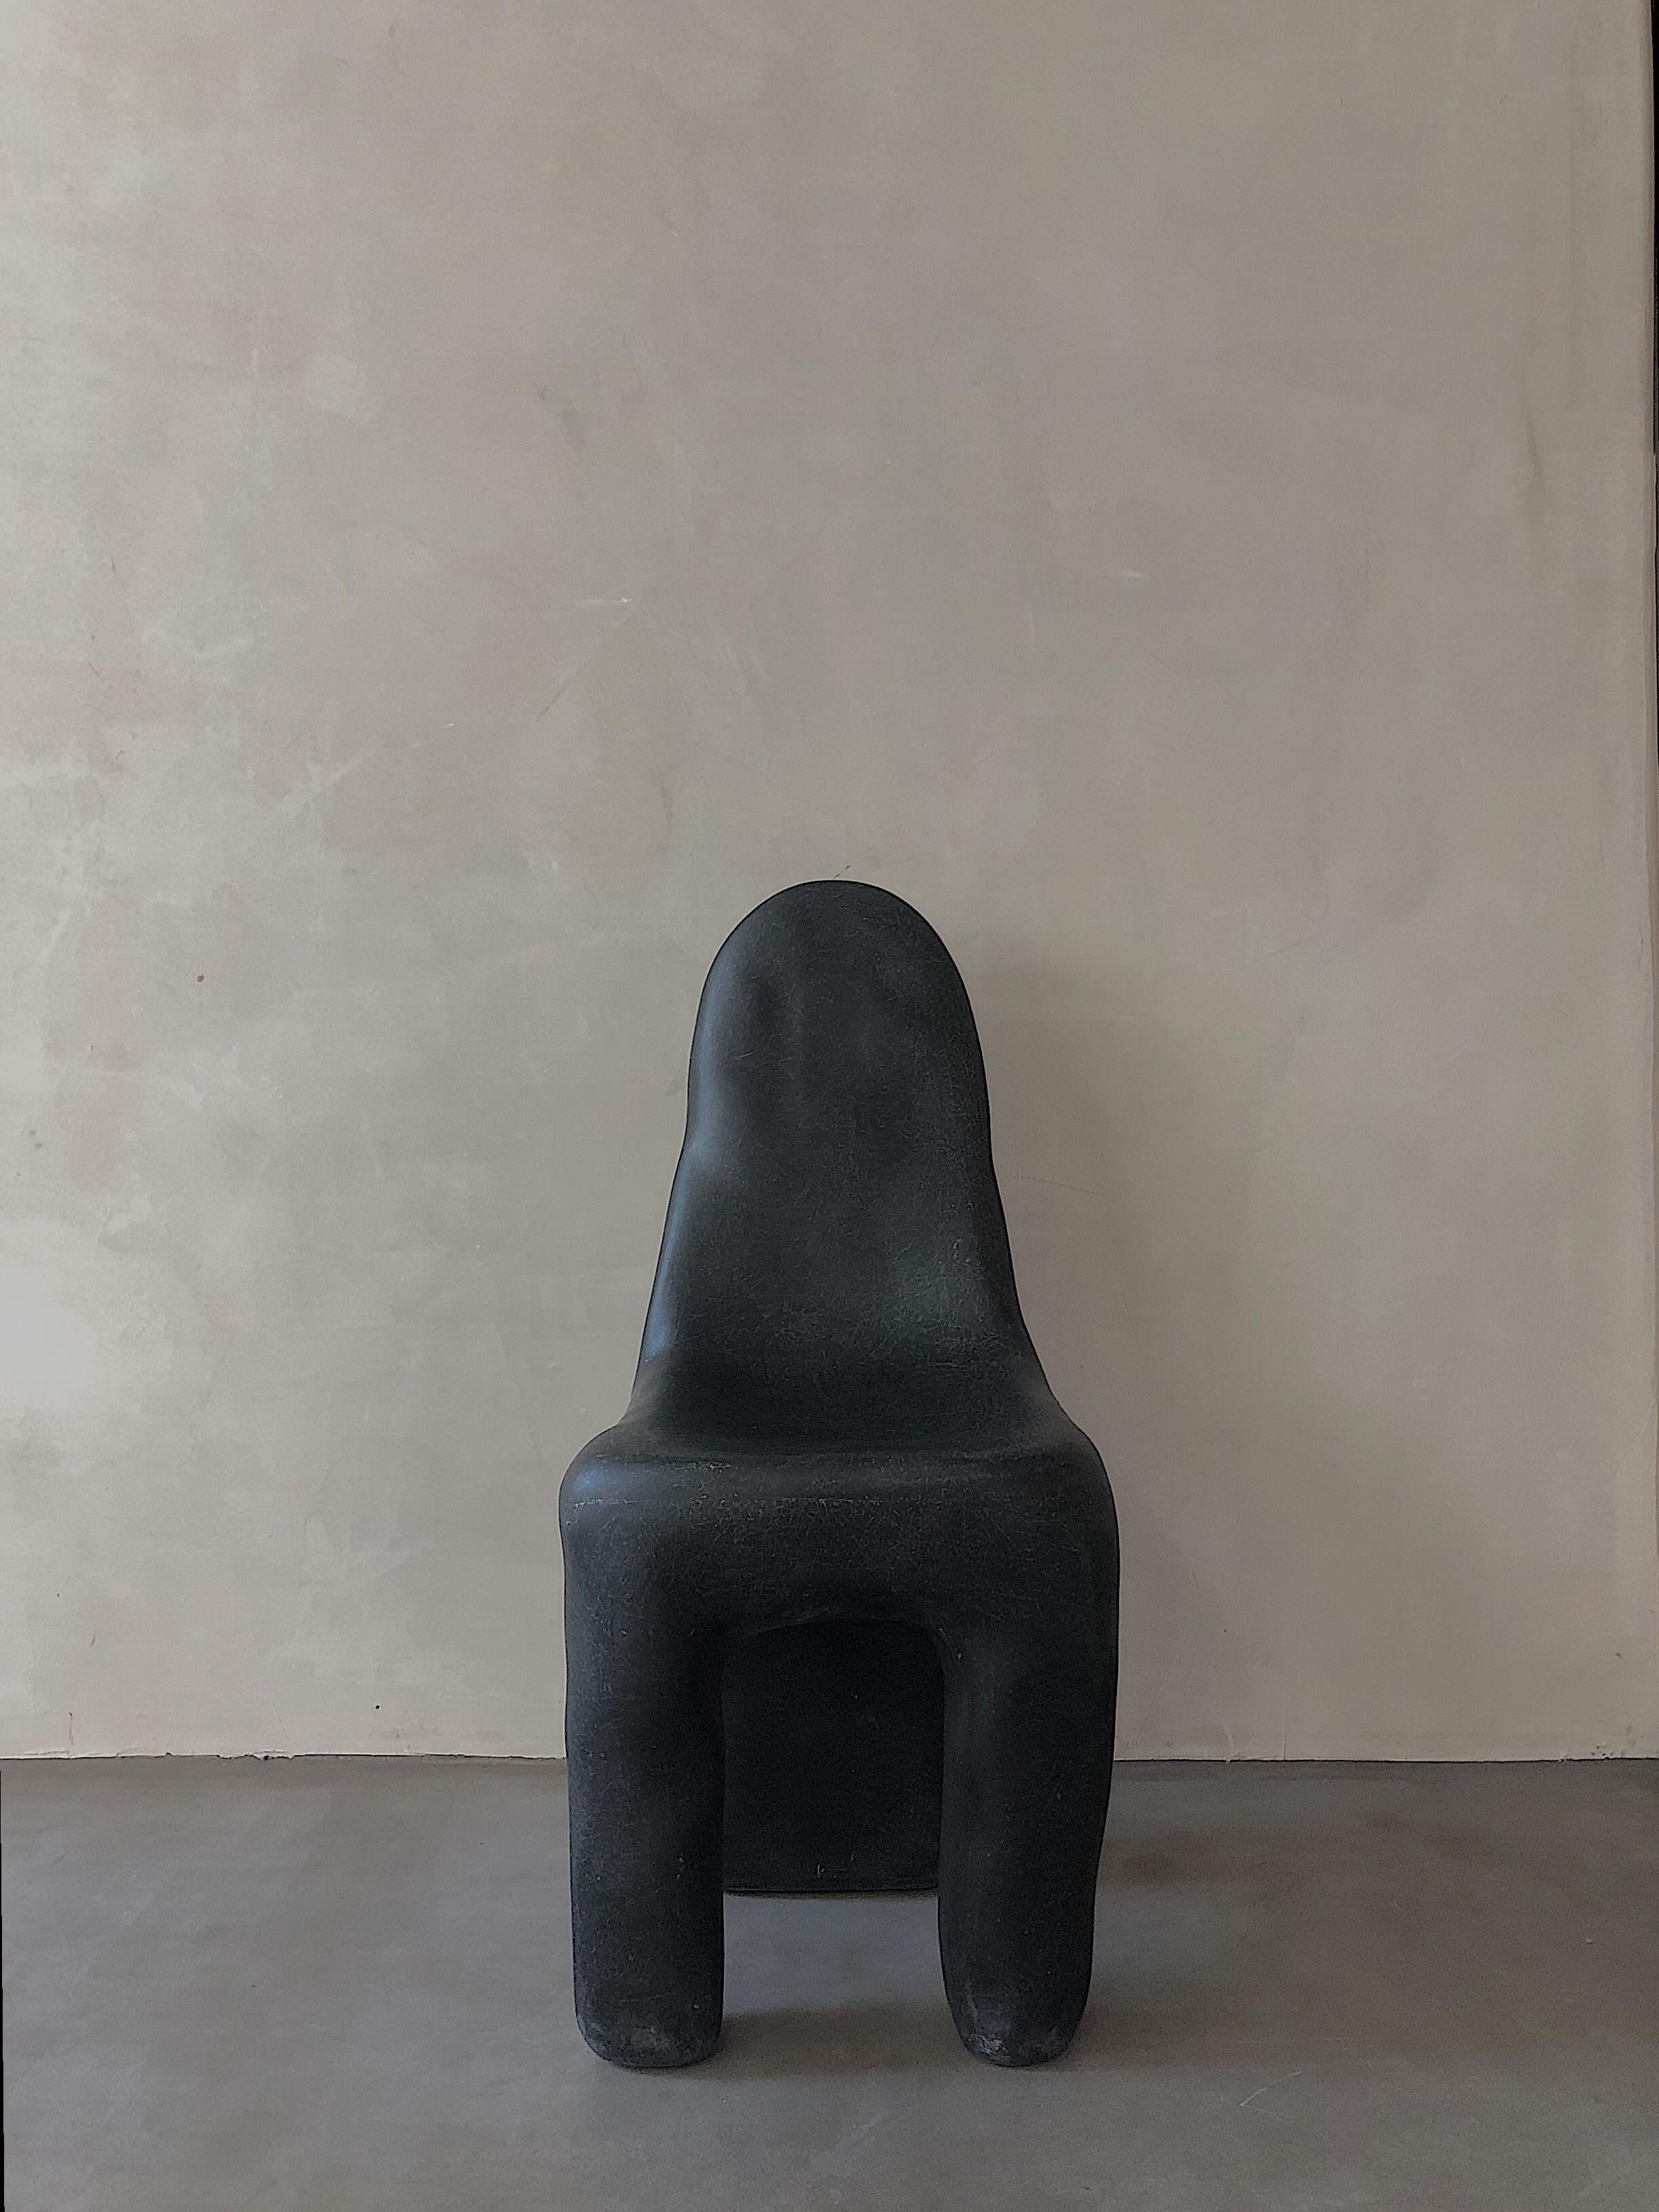 Black Playdough chair by kar
Materials: FRP.
Dimensions: 37 x 39 x 89 cm.

Soft like cotton, with a strong contrast to the hard texture, the unique appearance is eye-catching no matter where it is placed.

Kar- is the root of Sanskrit Karma, meaning